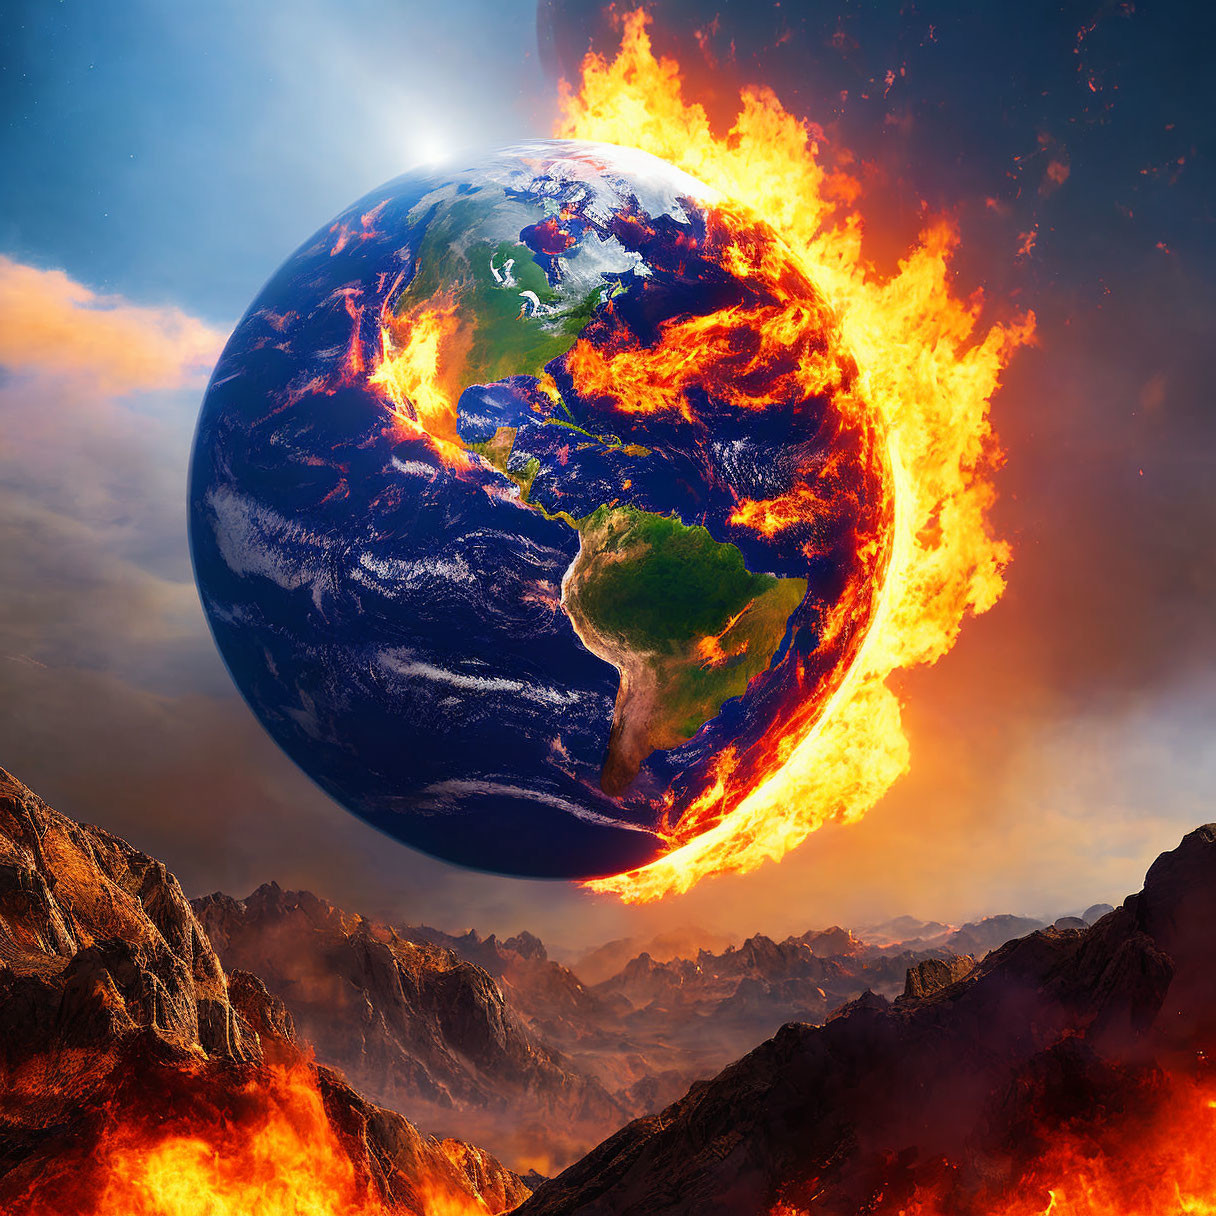 Planet Earth is on fire